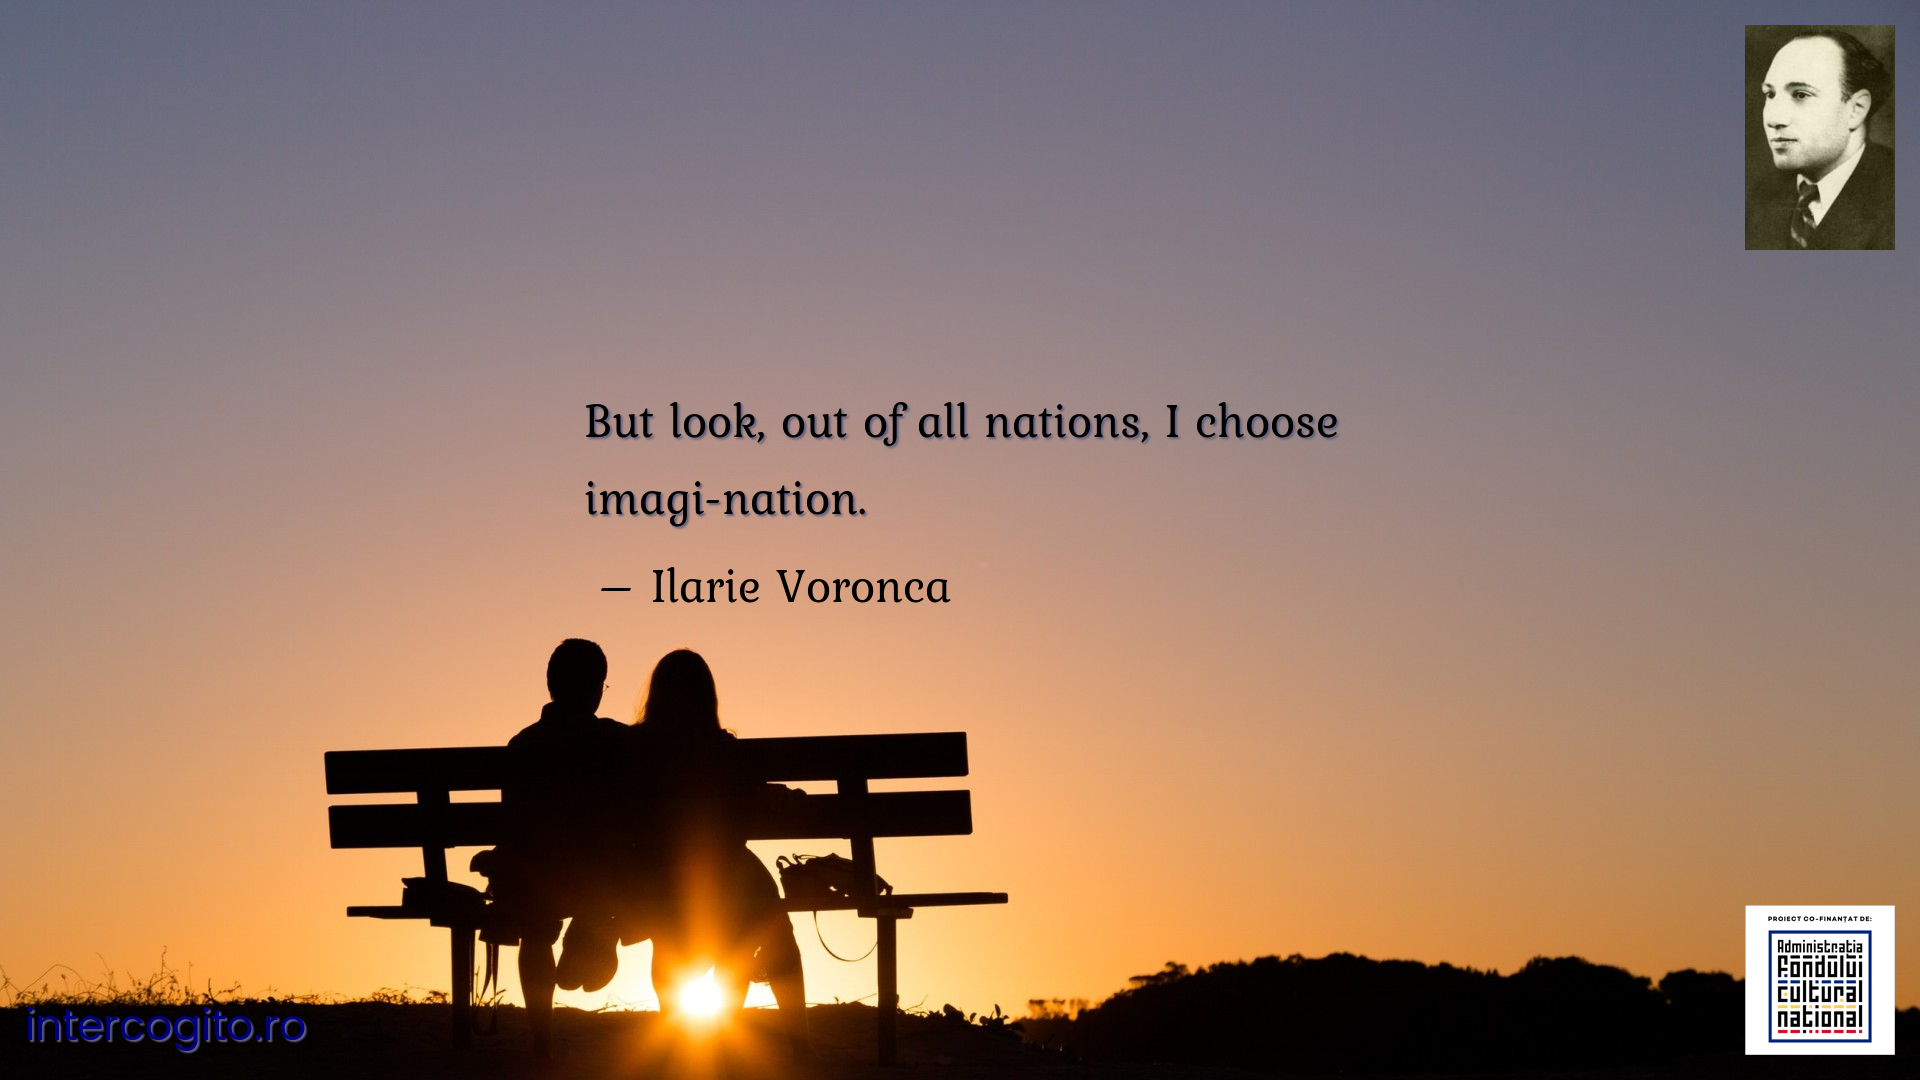 But look, out of all nations, I choose imagi-nation.